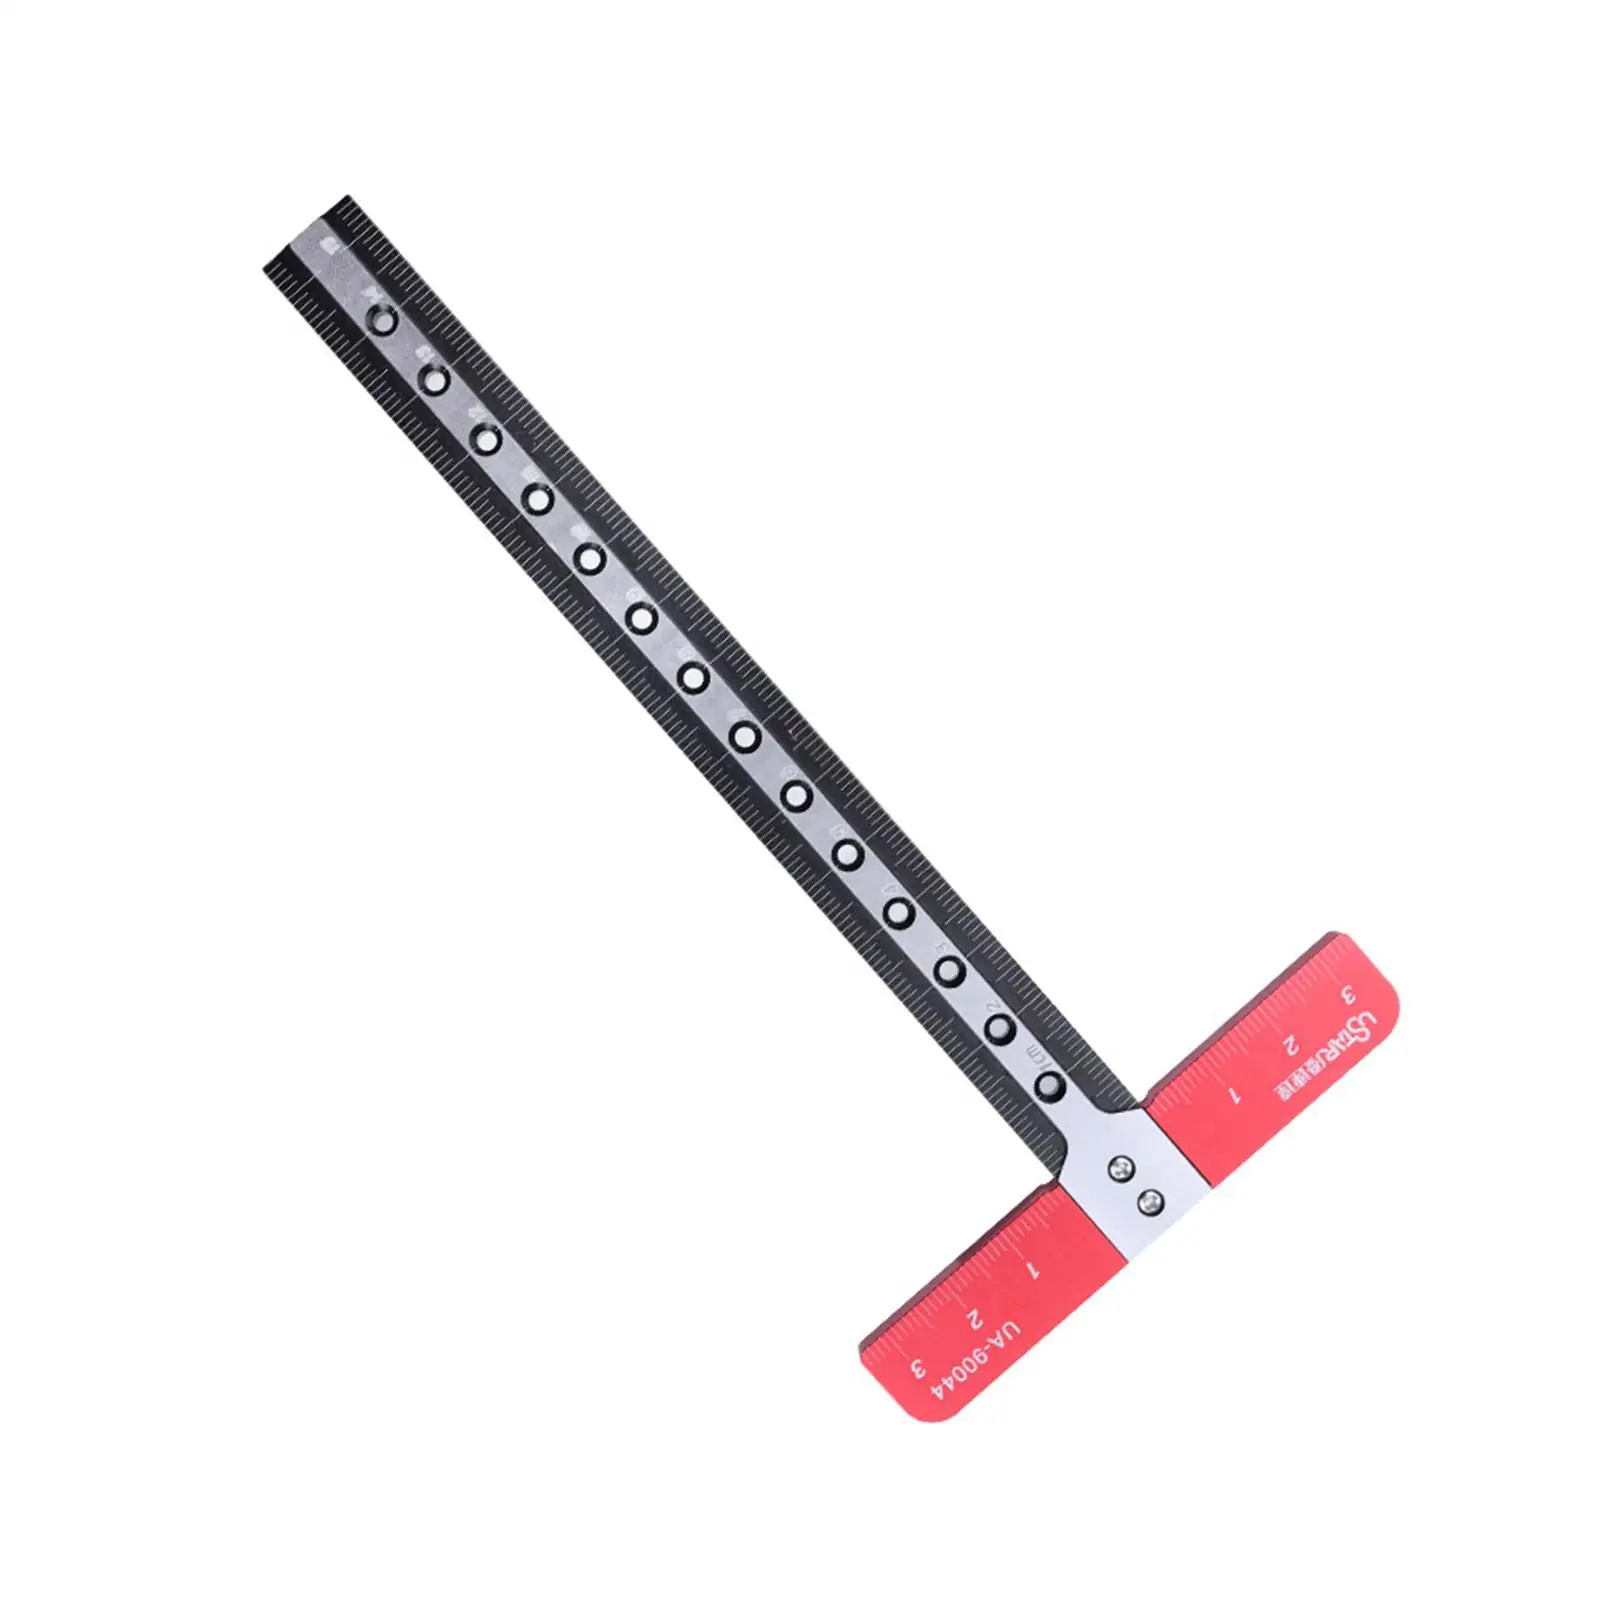 T Square Ruler Measure Tools Shape Positioning Ruler -90044 for 170Mmx85mm